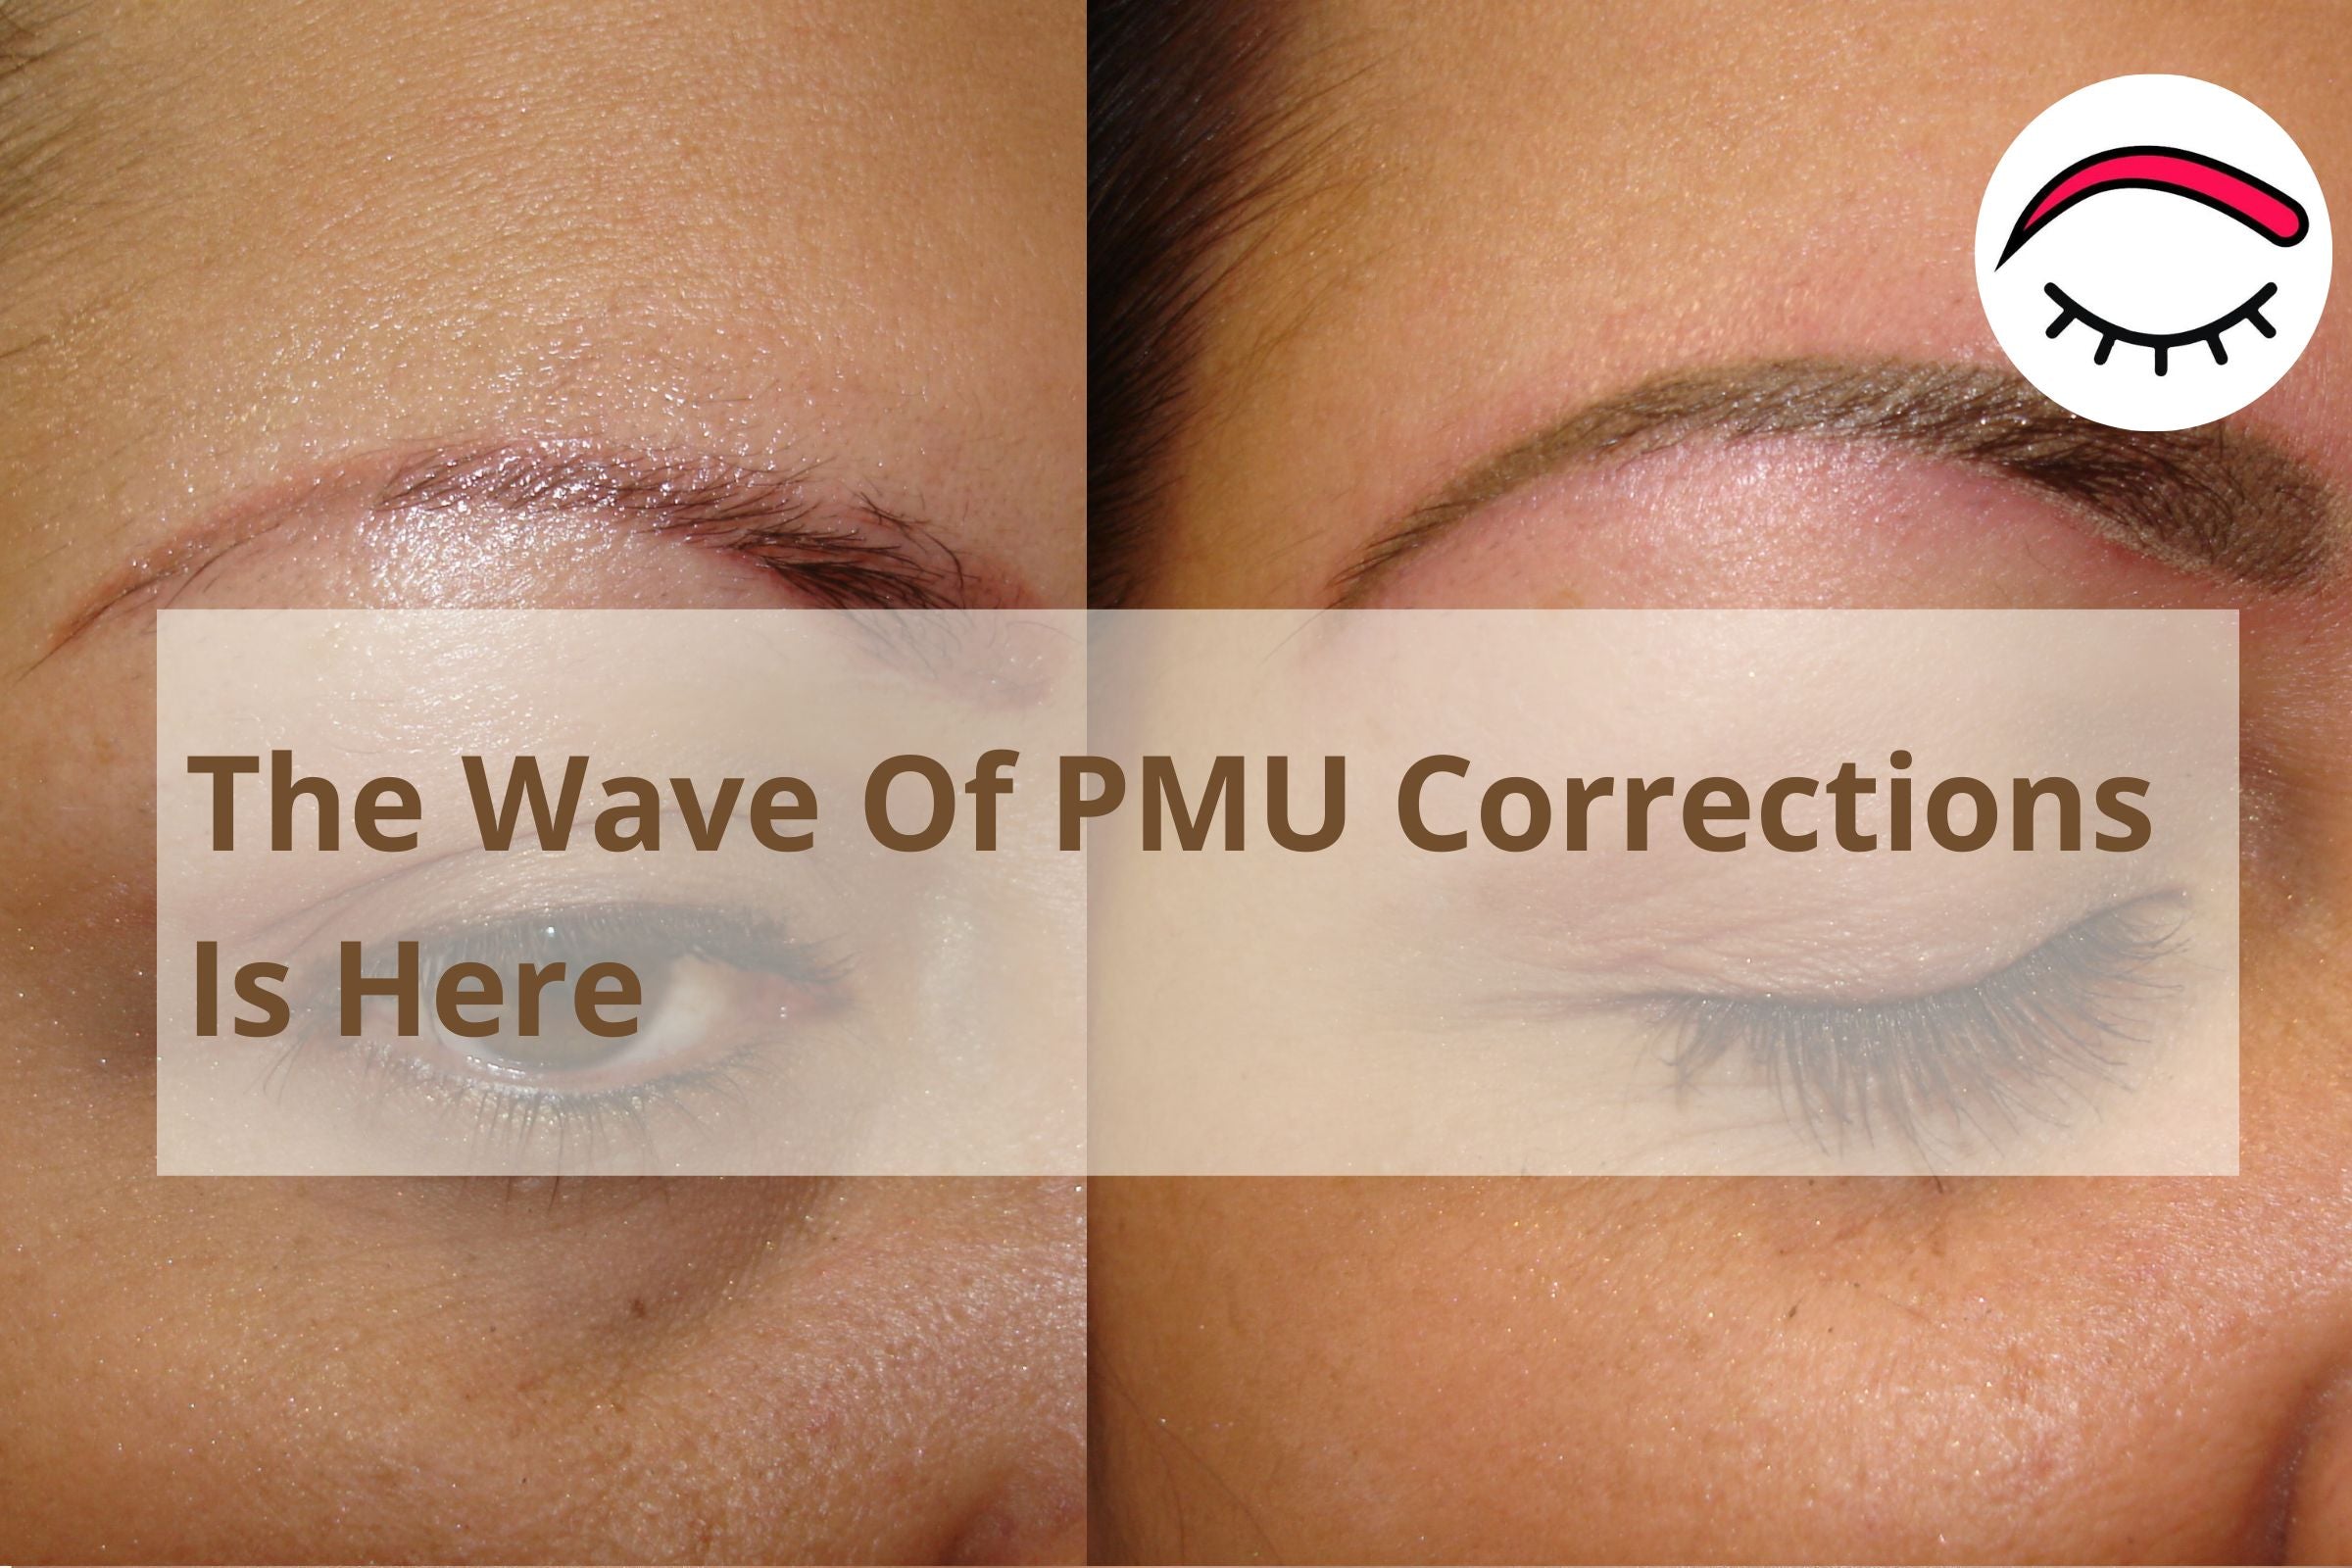 The Wave Of PMU Corrections Is Here